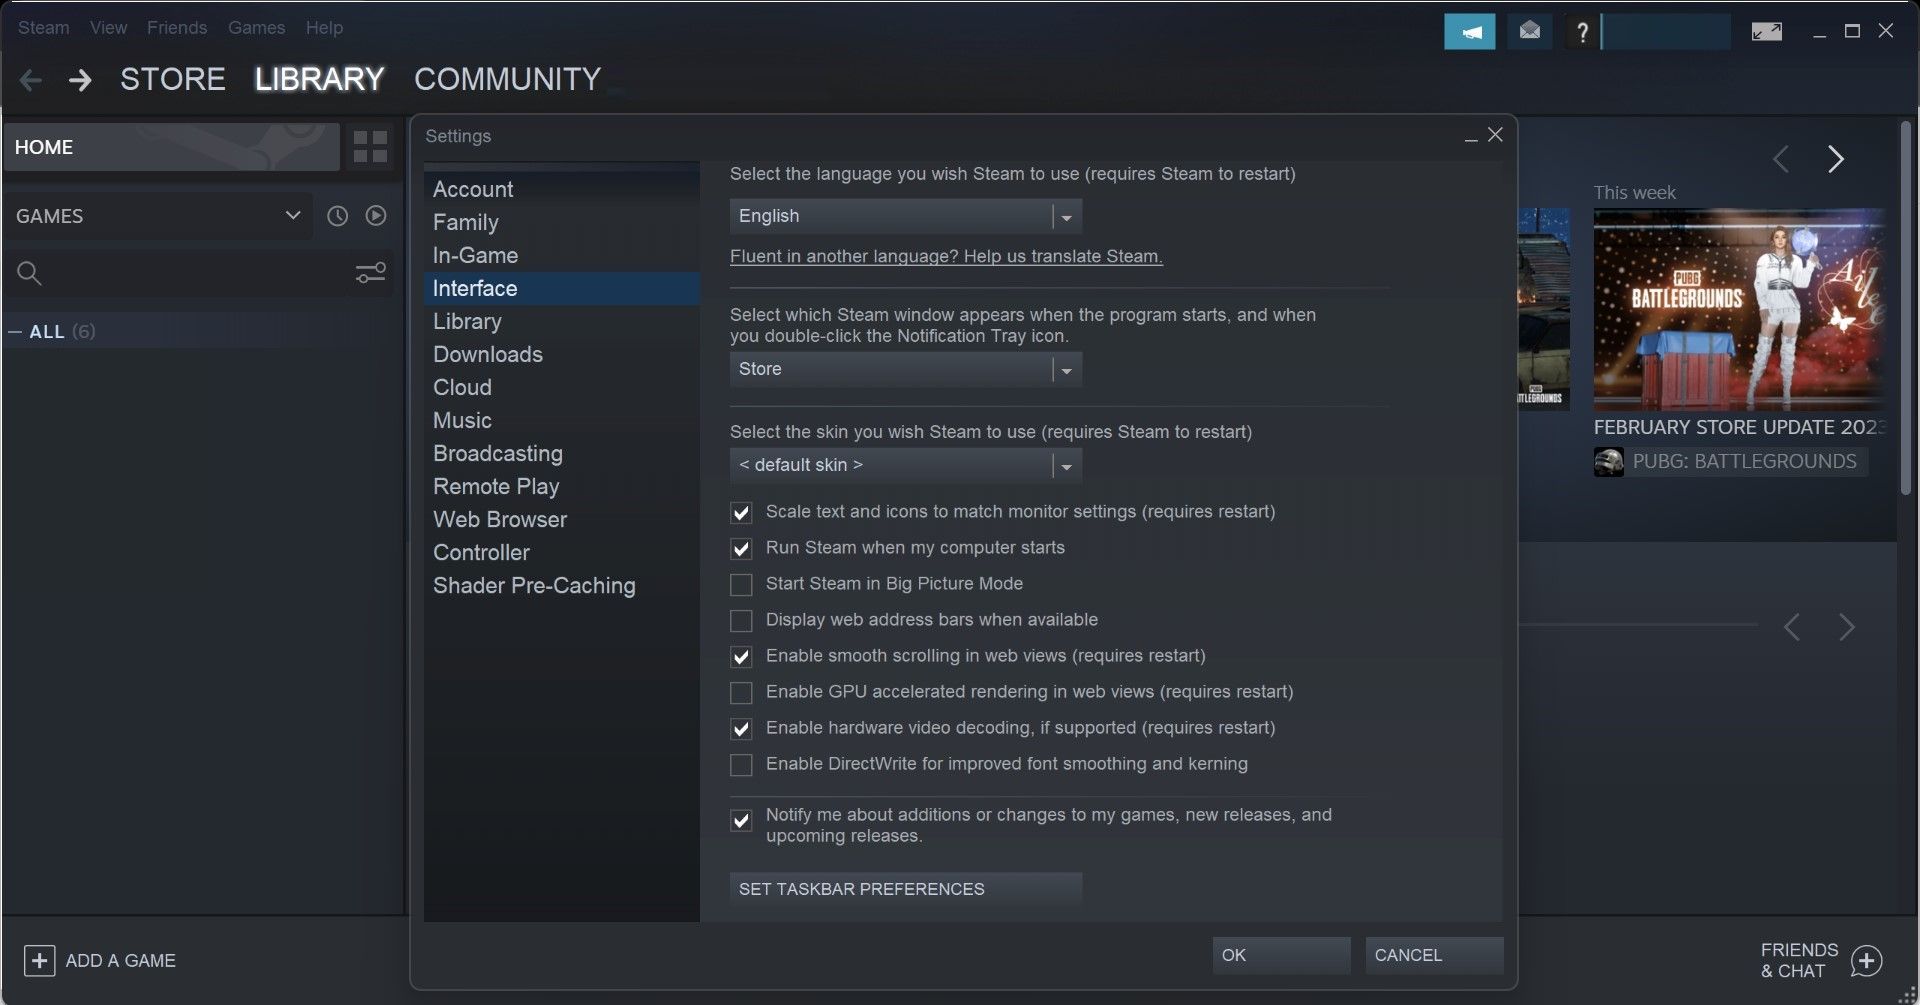 Disable Certain Settings in the Interface Tab of Steam Client